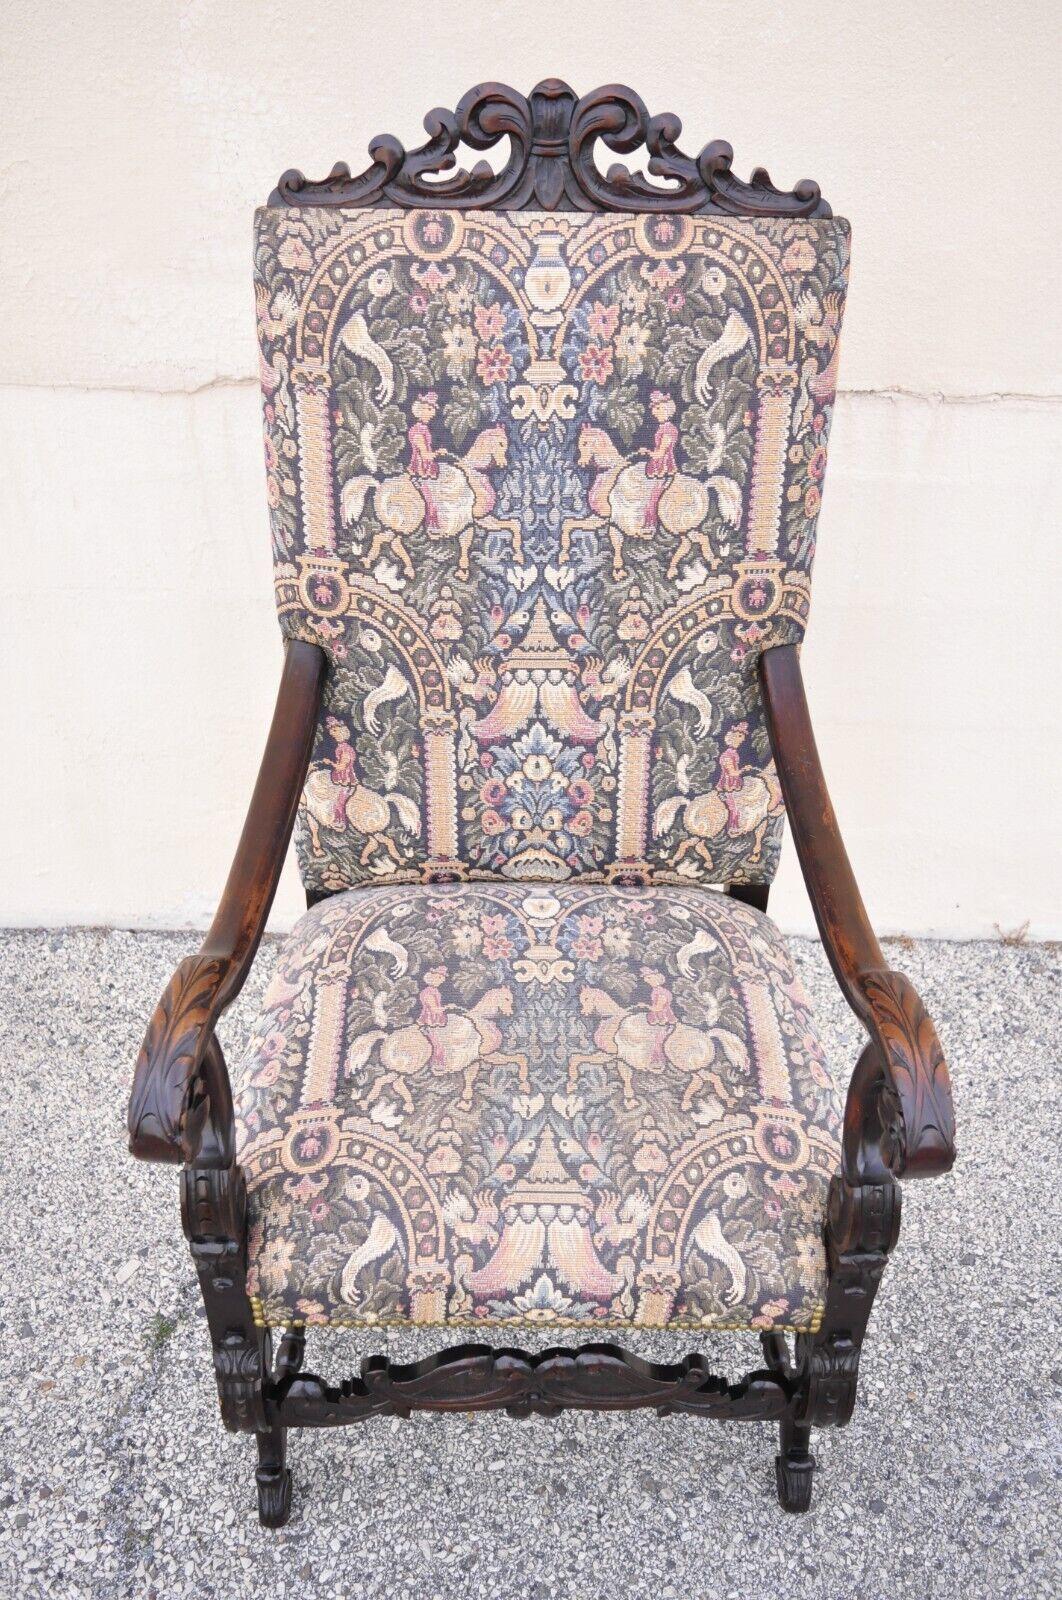 Antique Italian Renaissance Baroque Tapestry Throne Lounge Arm Chair For Sale 8